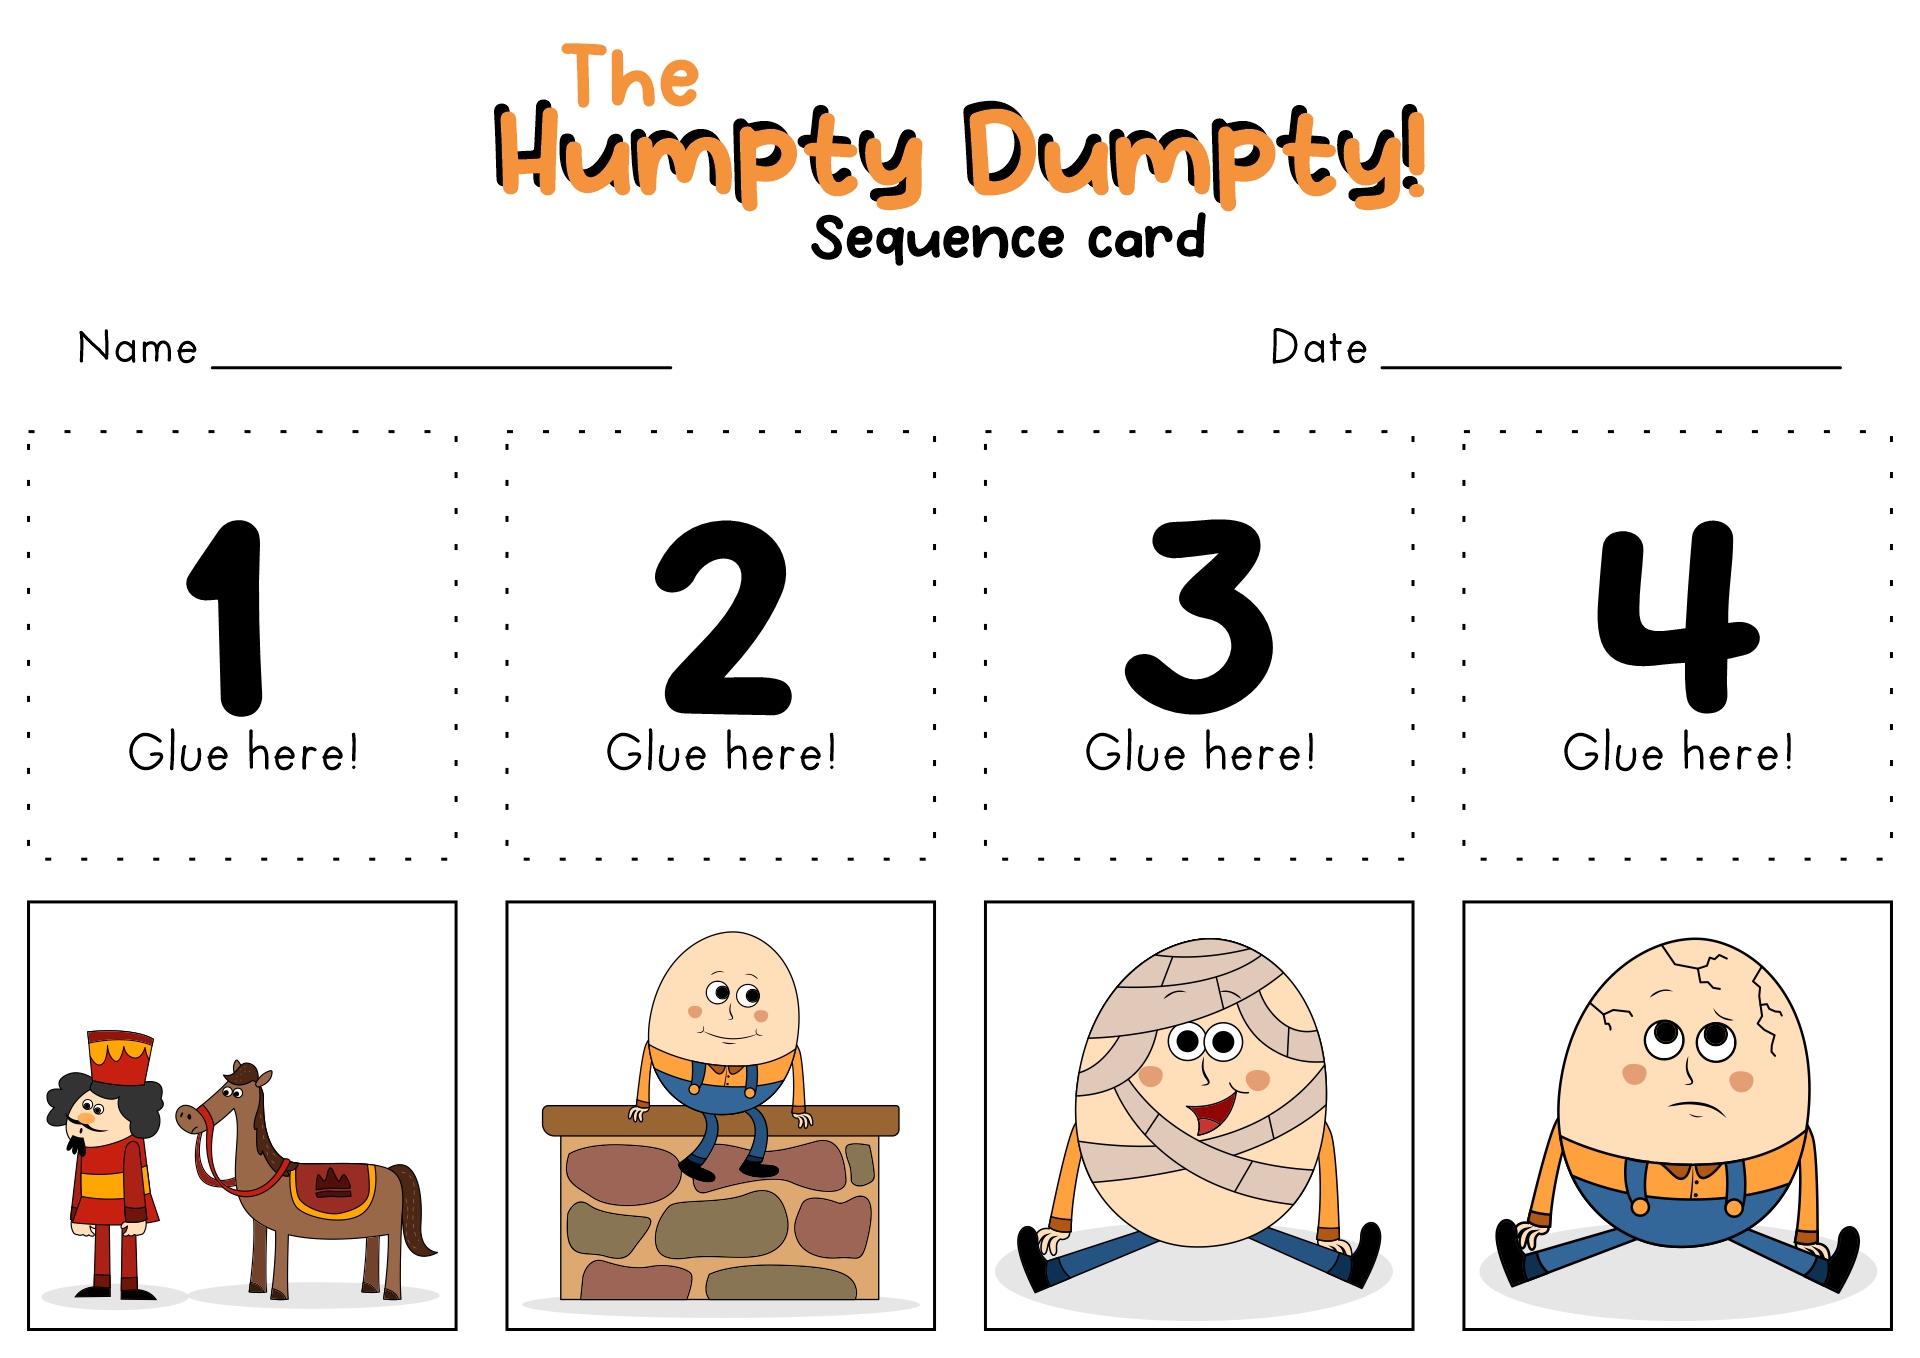 Humpty Dumpty Sequence Cards Image